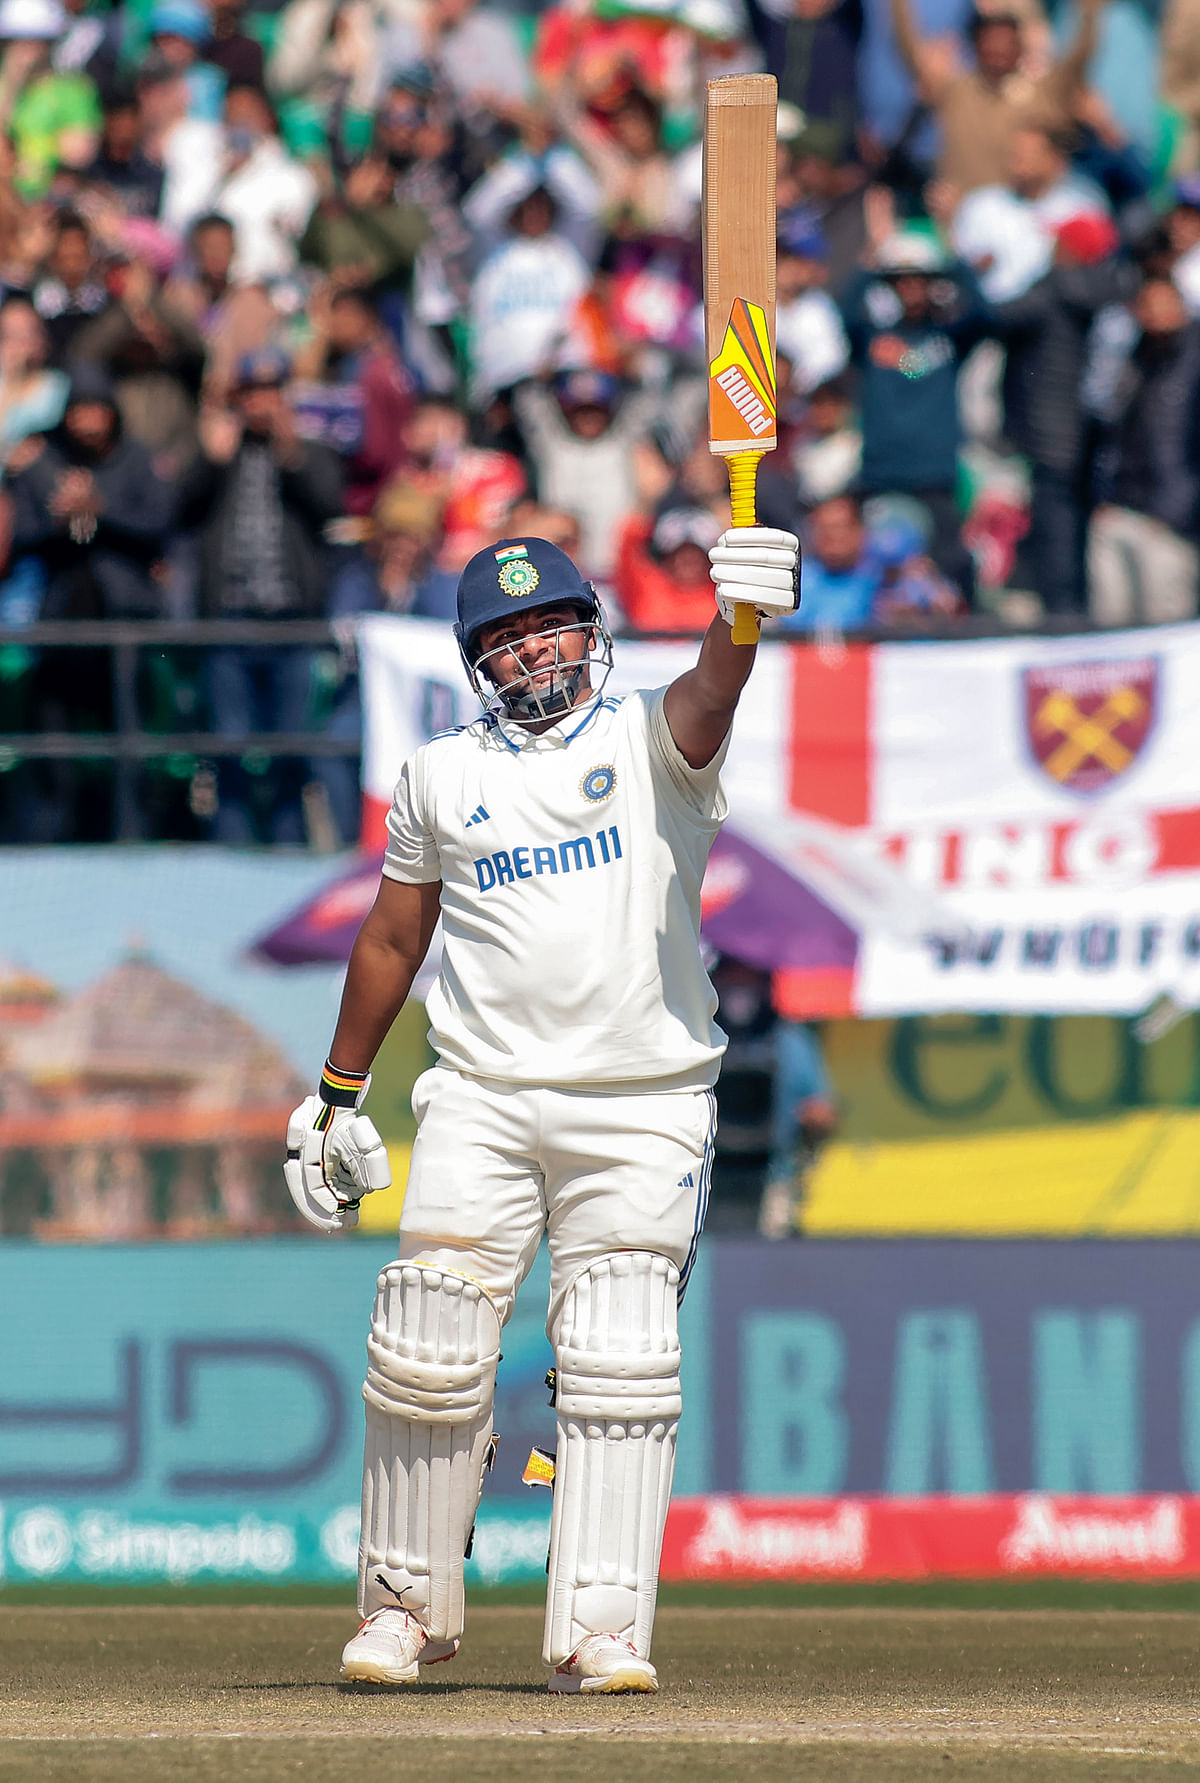 Riding on centuries by Rohit Sharma and Shubman Gill, India lead England by 255 runs on Day 2 of the fifth Test.